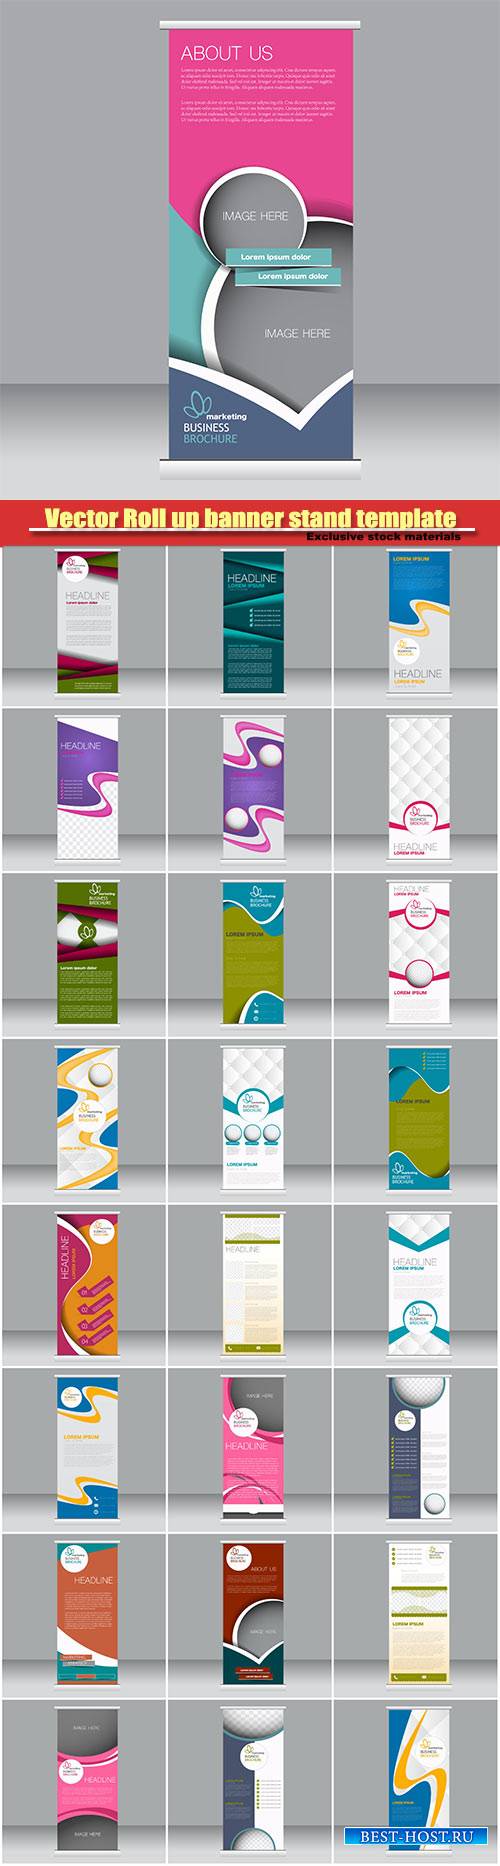 Vector Roll up banner stand template, abstract background for design, busin ...